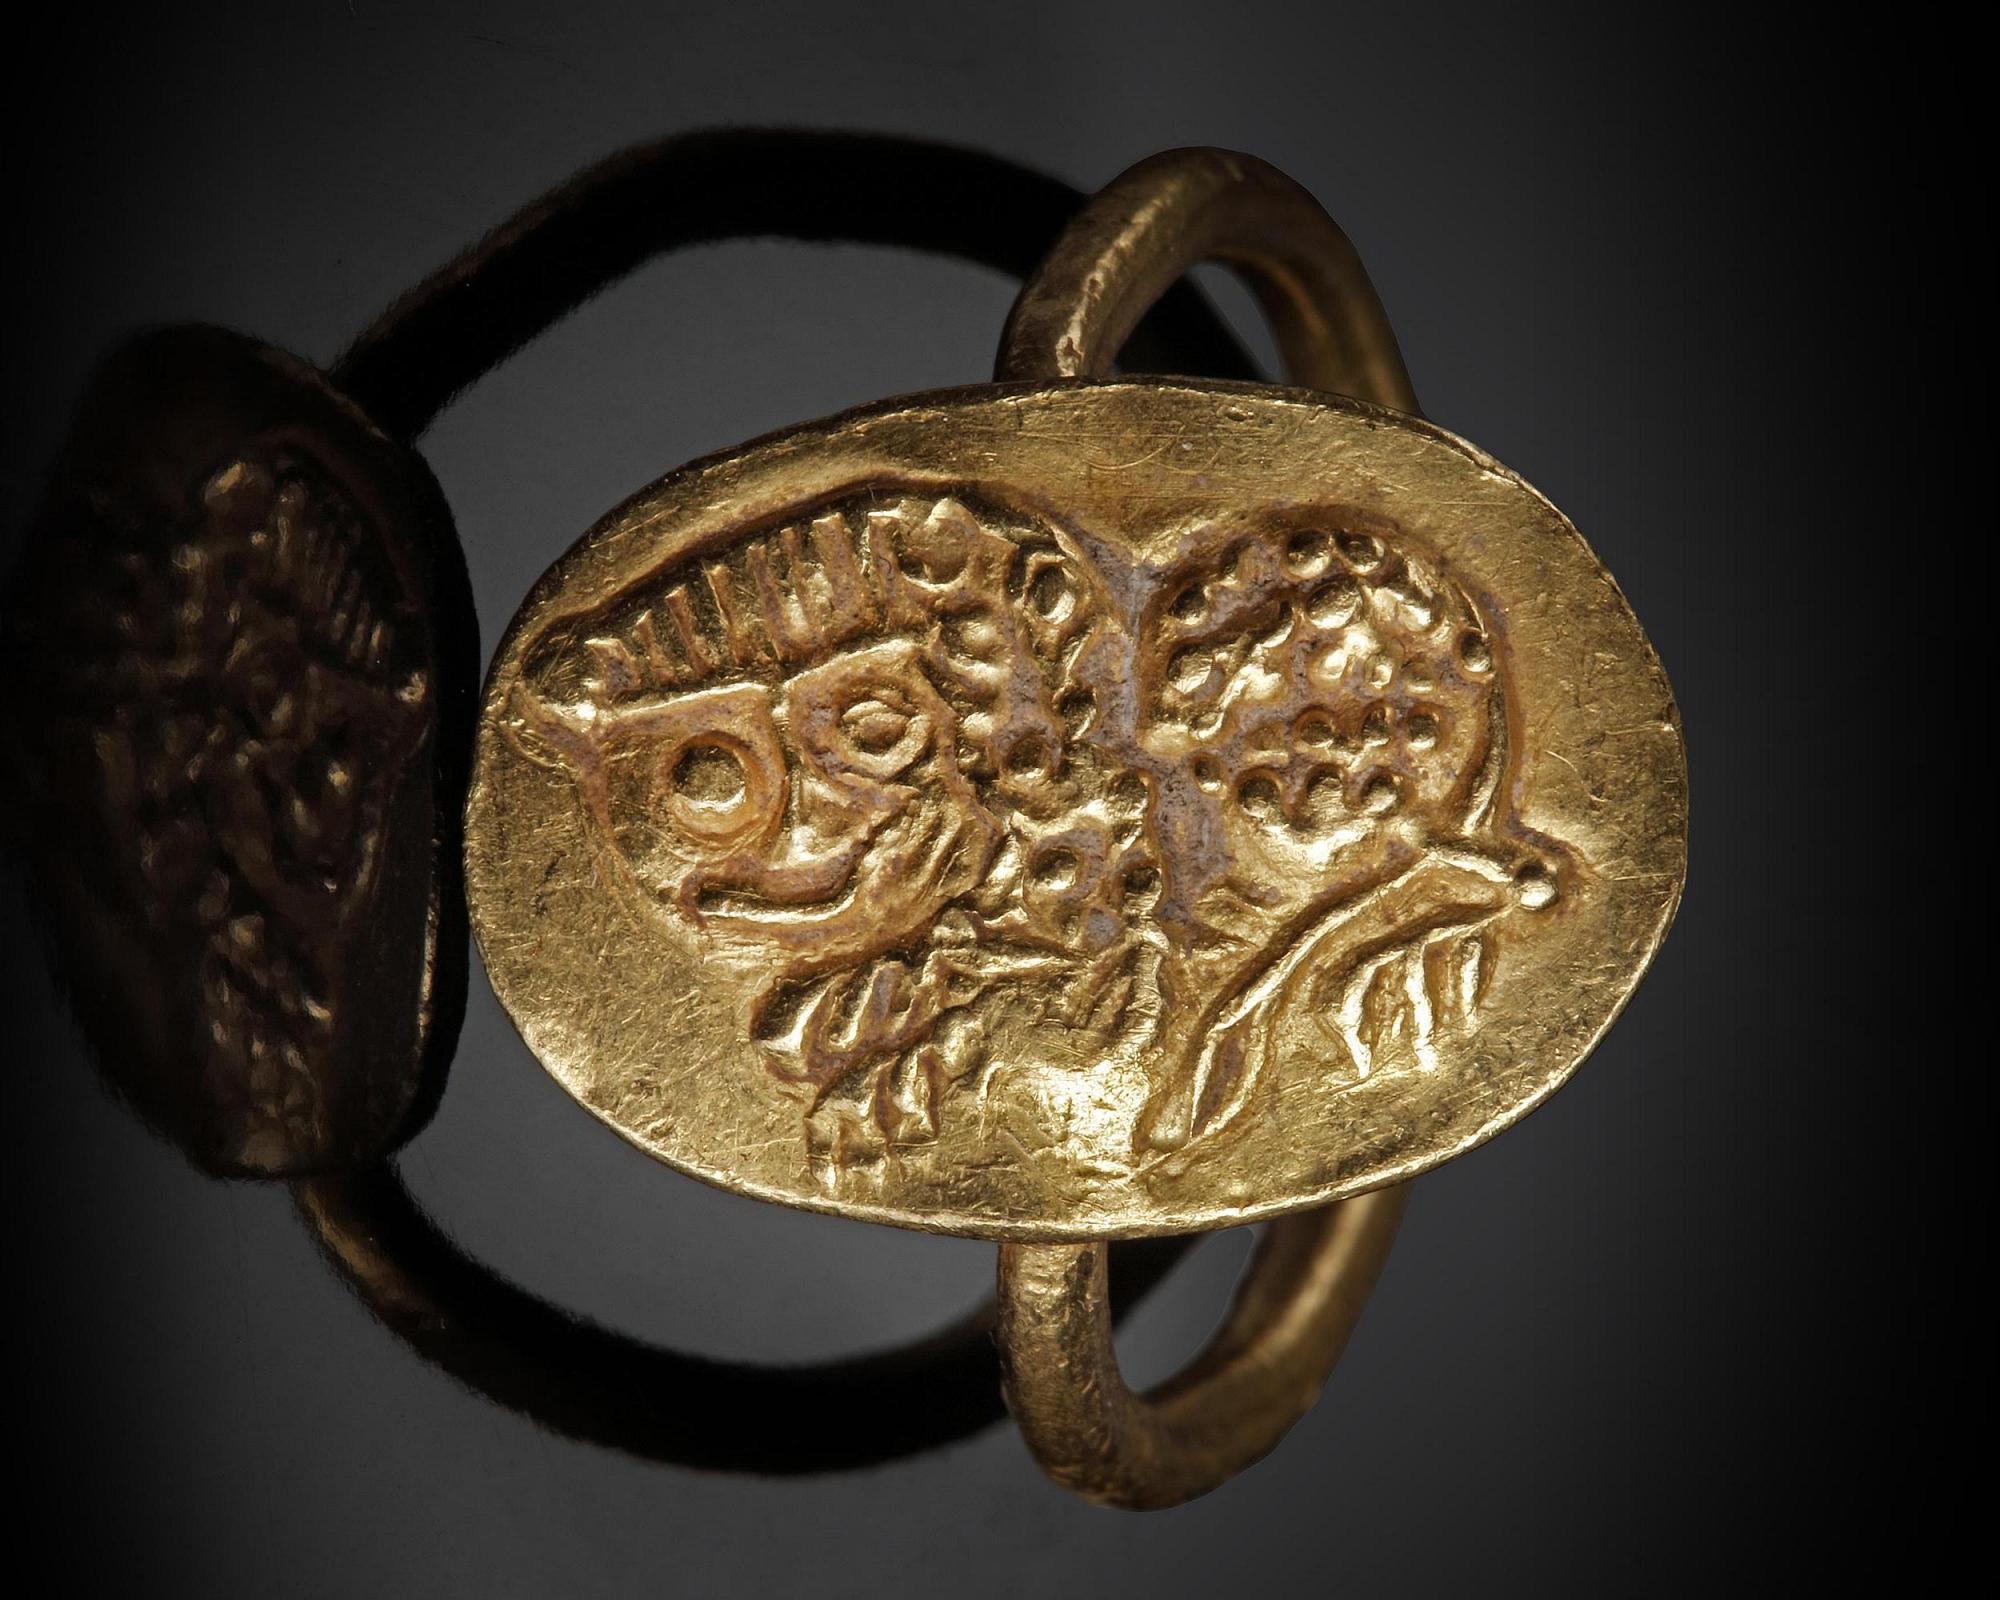 A BYZANTINE GOLD RING WITH A LION FACING LEFT, CIRCA 6TH CENTURY A.D. - Image 2 of 5